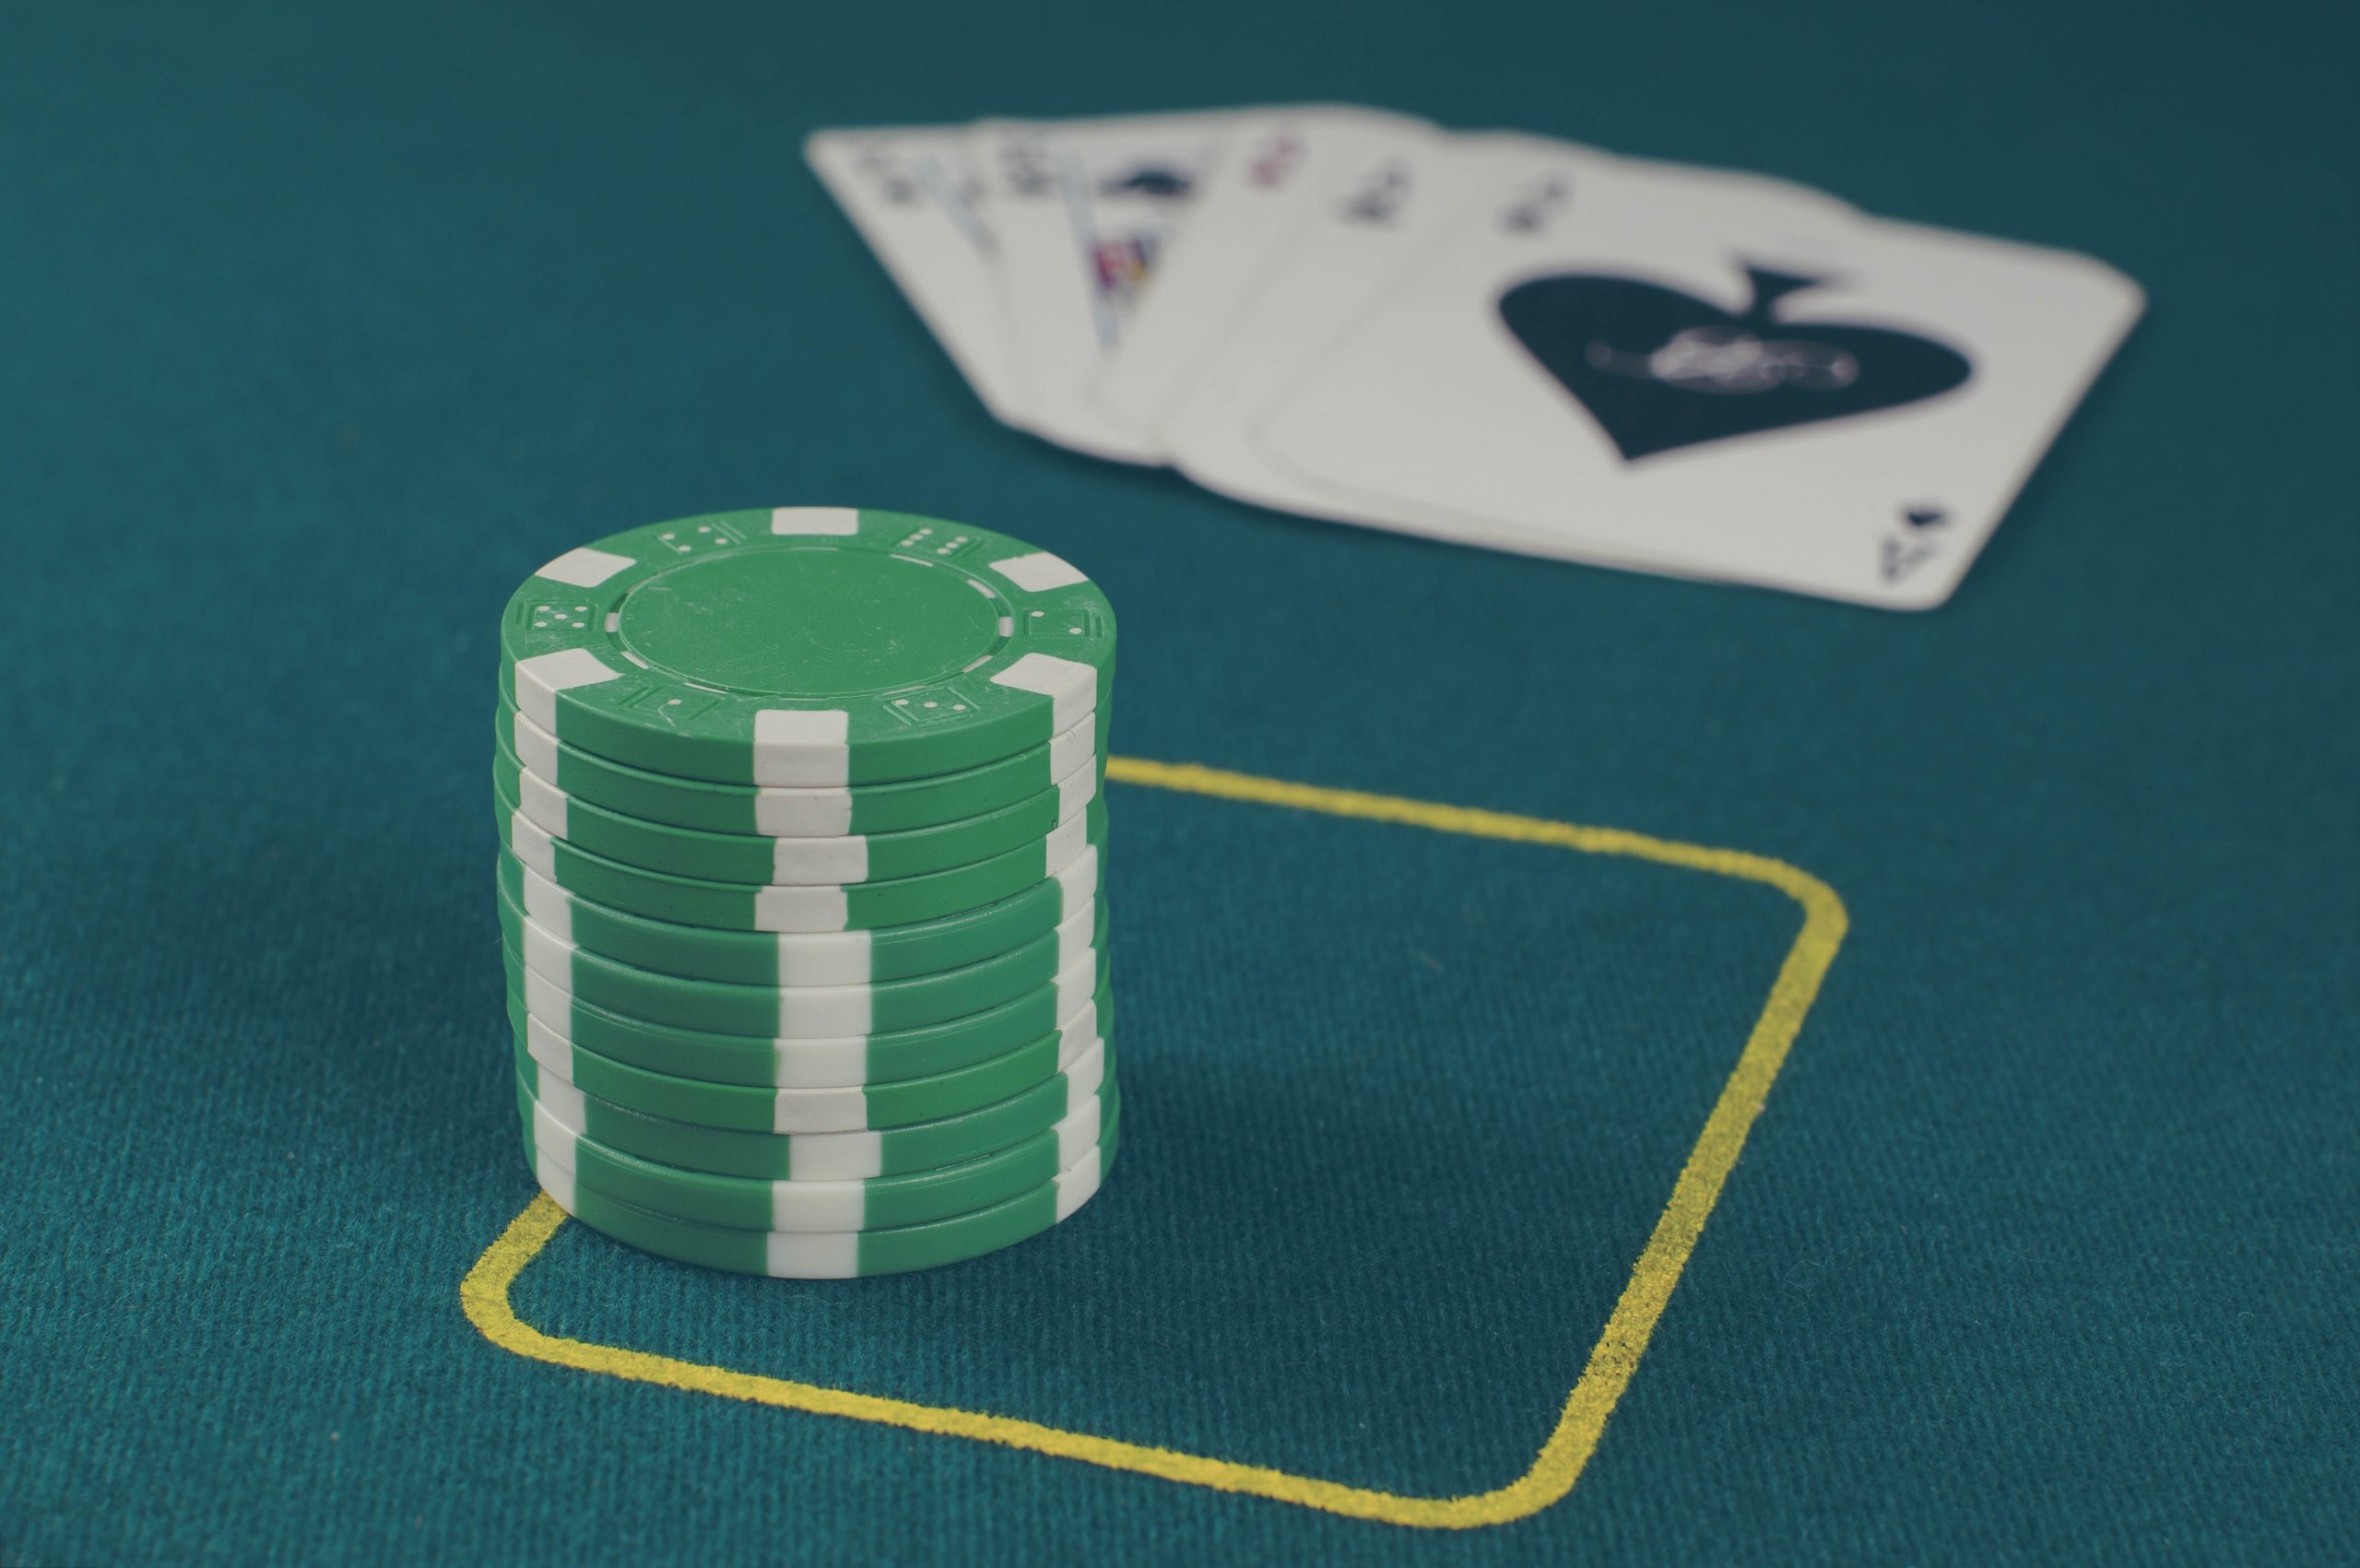 How to Choose A Trusted and Safe Canadian Casino